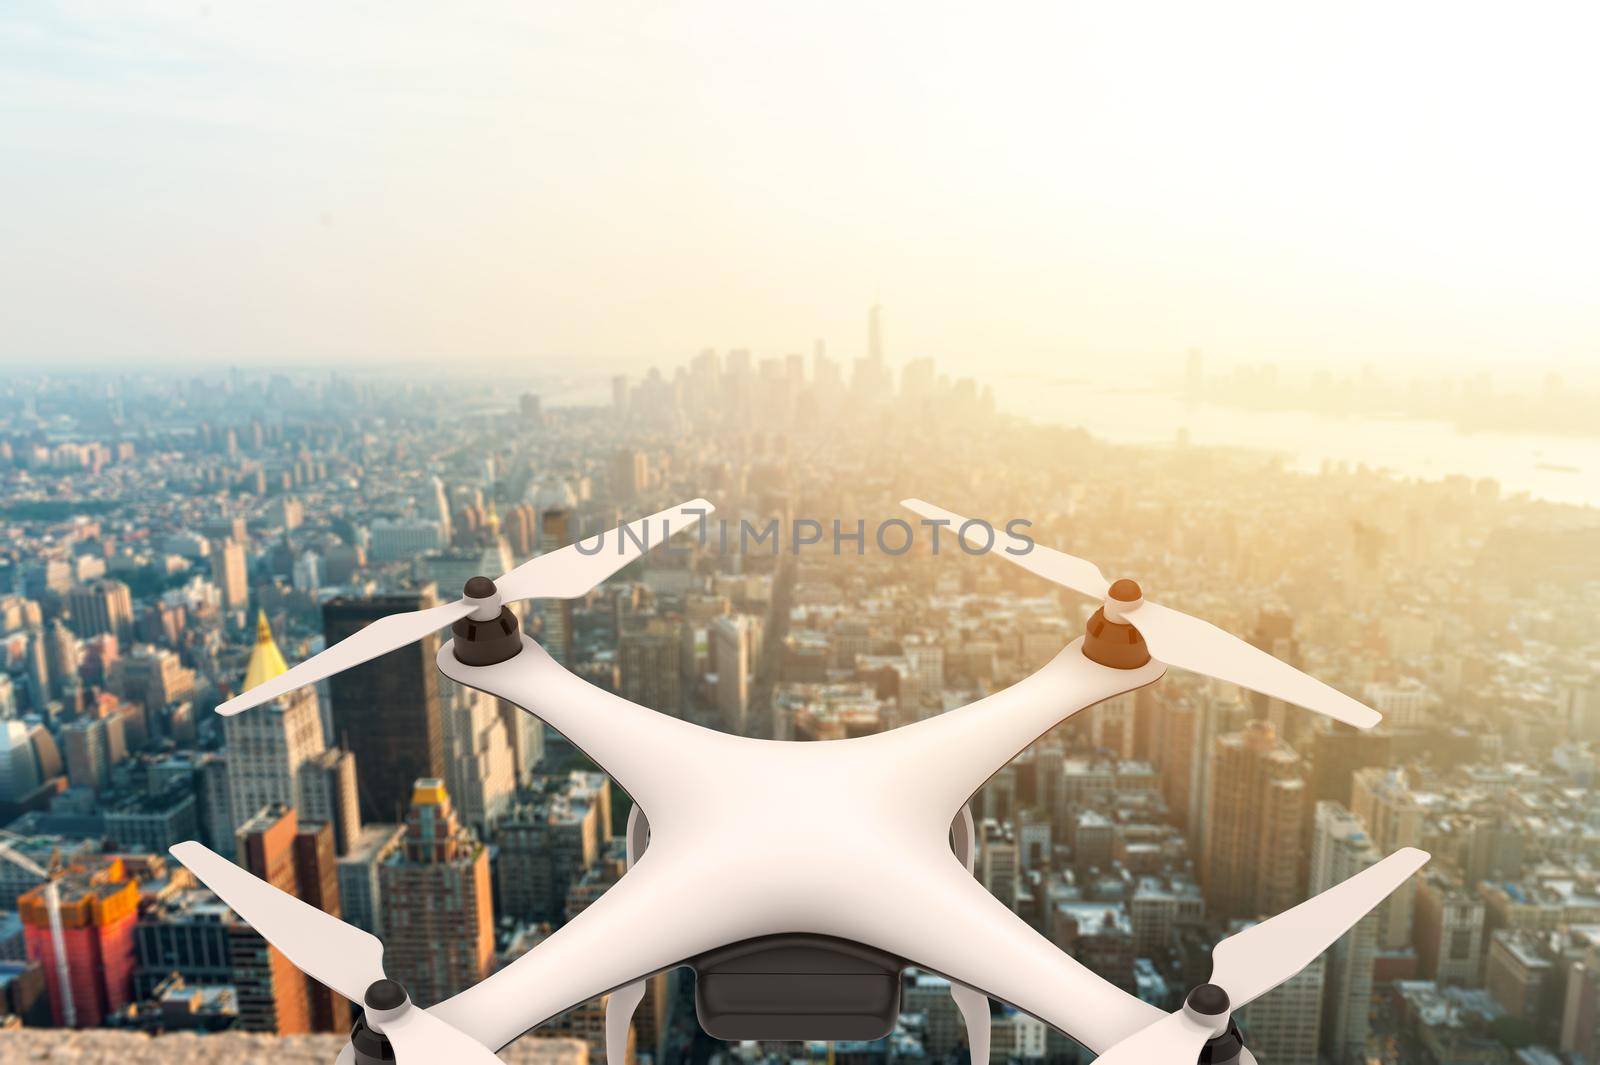 Drone with digital camera flying over a modern city at sunset by cla78